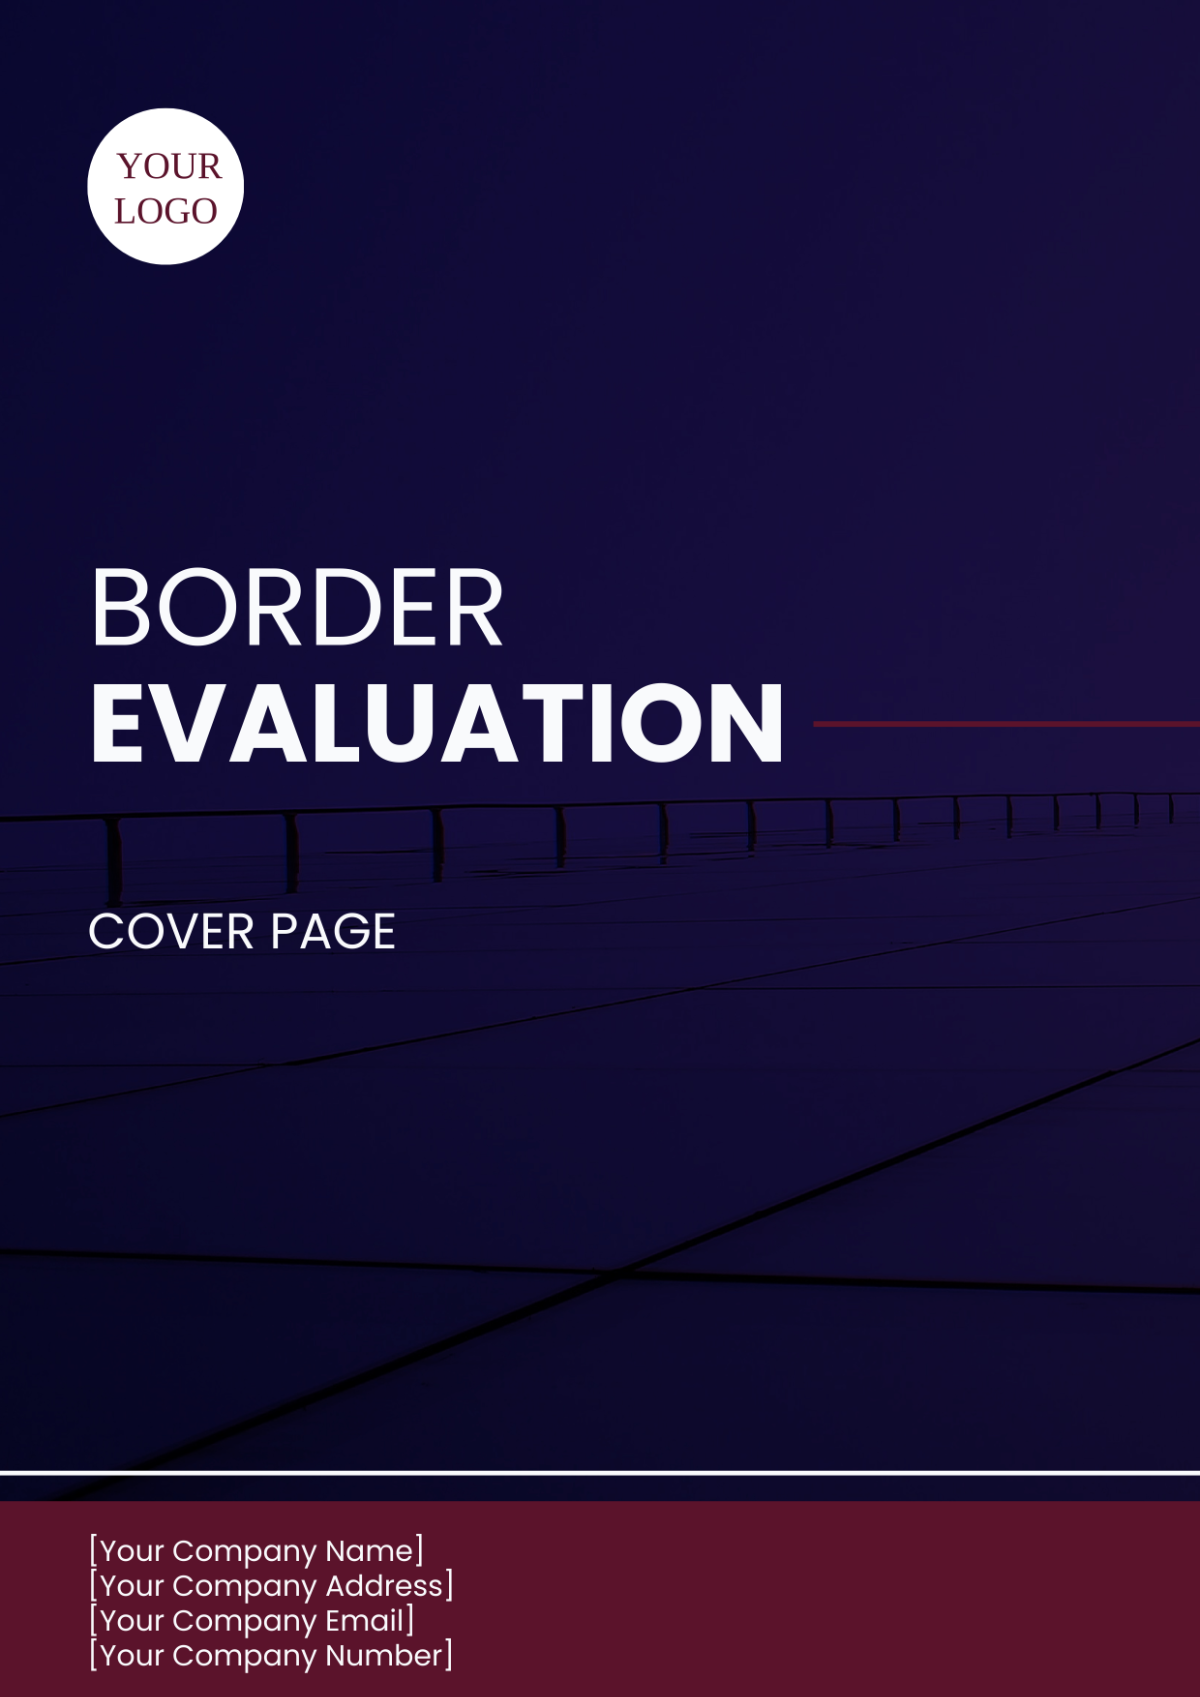 Border Evaluation Cover Page